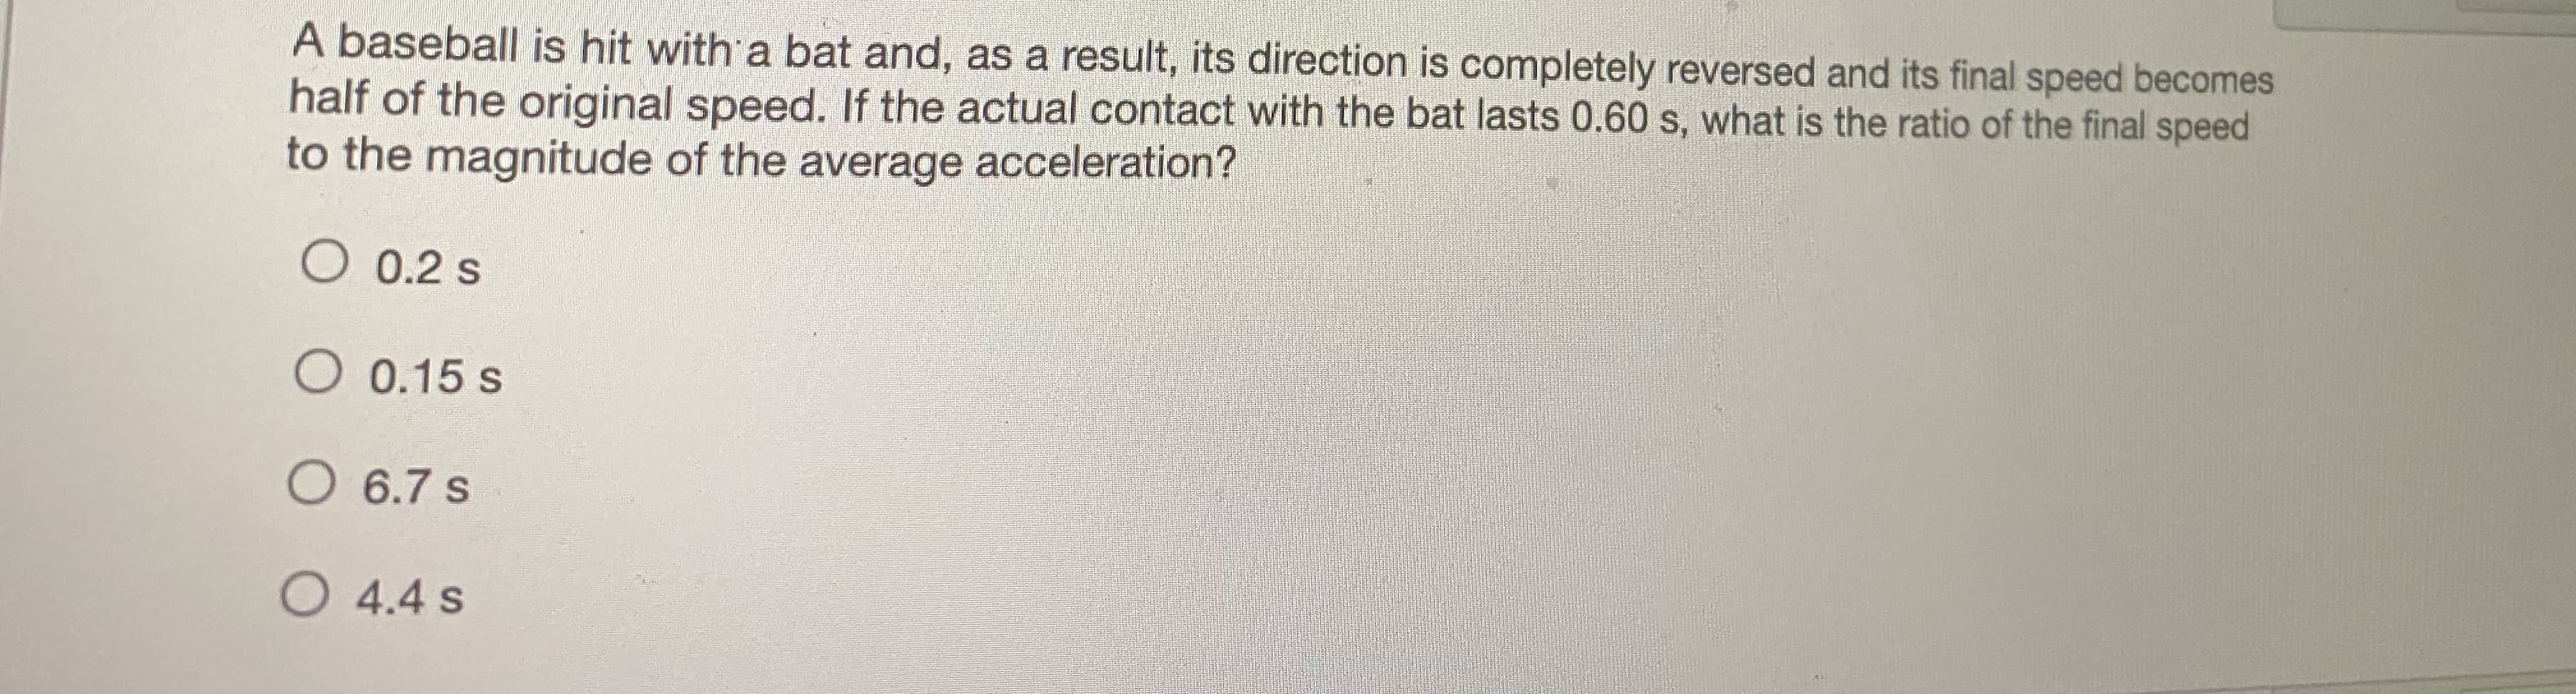 A baseball is hit with a bat and, as a result, its direction is completely reversed and its final speed becomes
half of the original speed. If the actual contact with the bat lasts 0.60 s, what is the ratio of the final speed
to the magnitude of the average acceleration?
